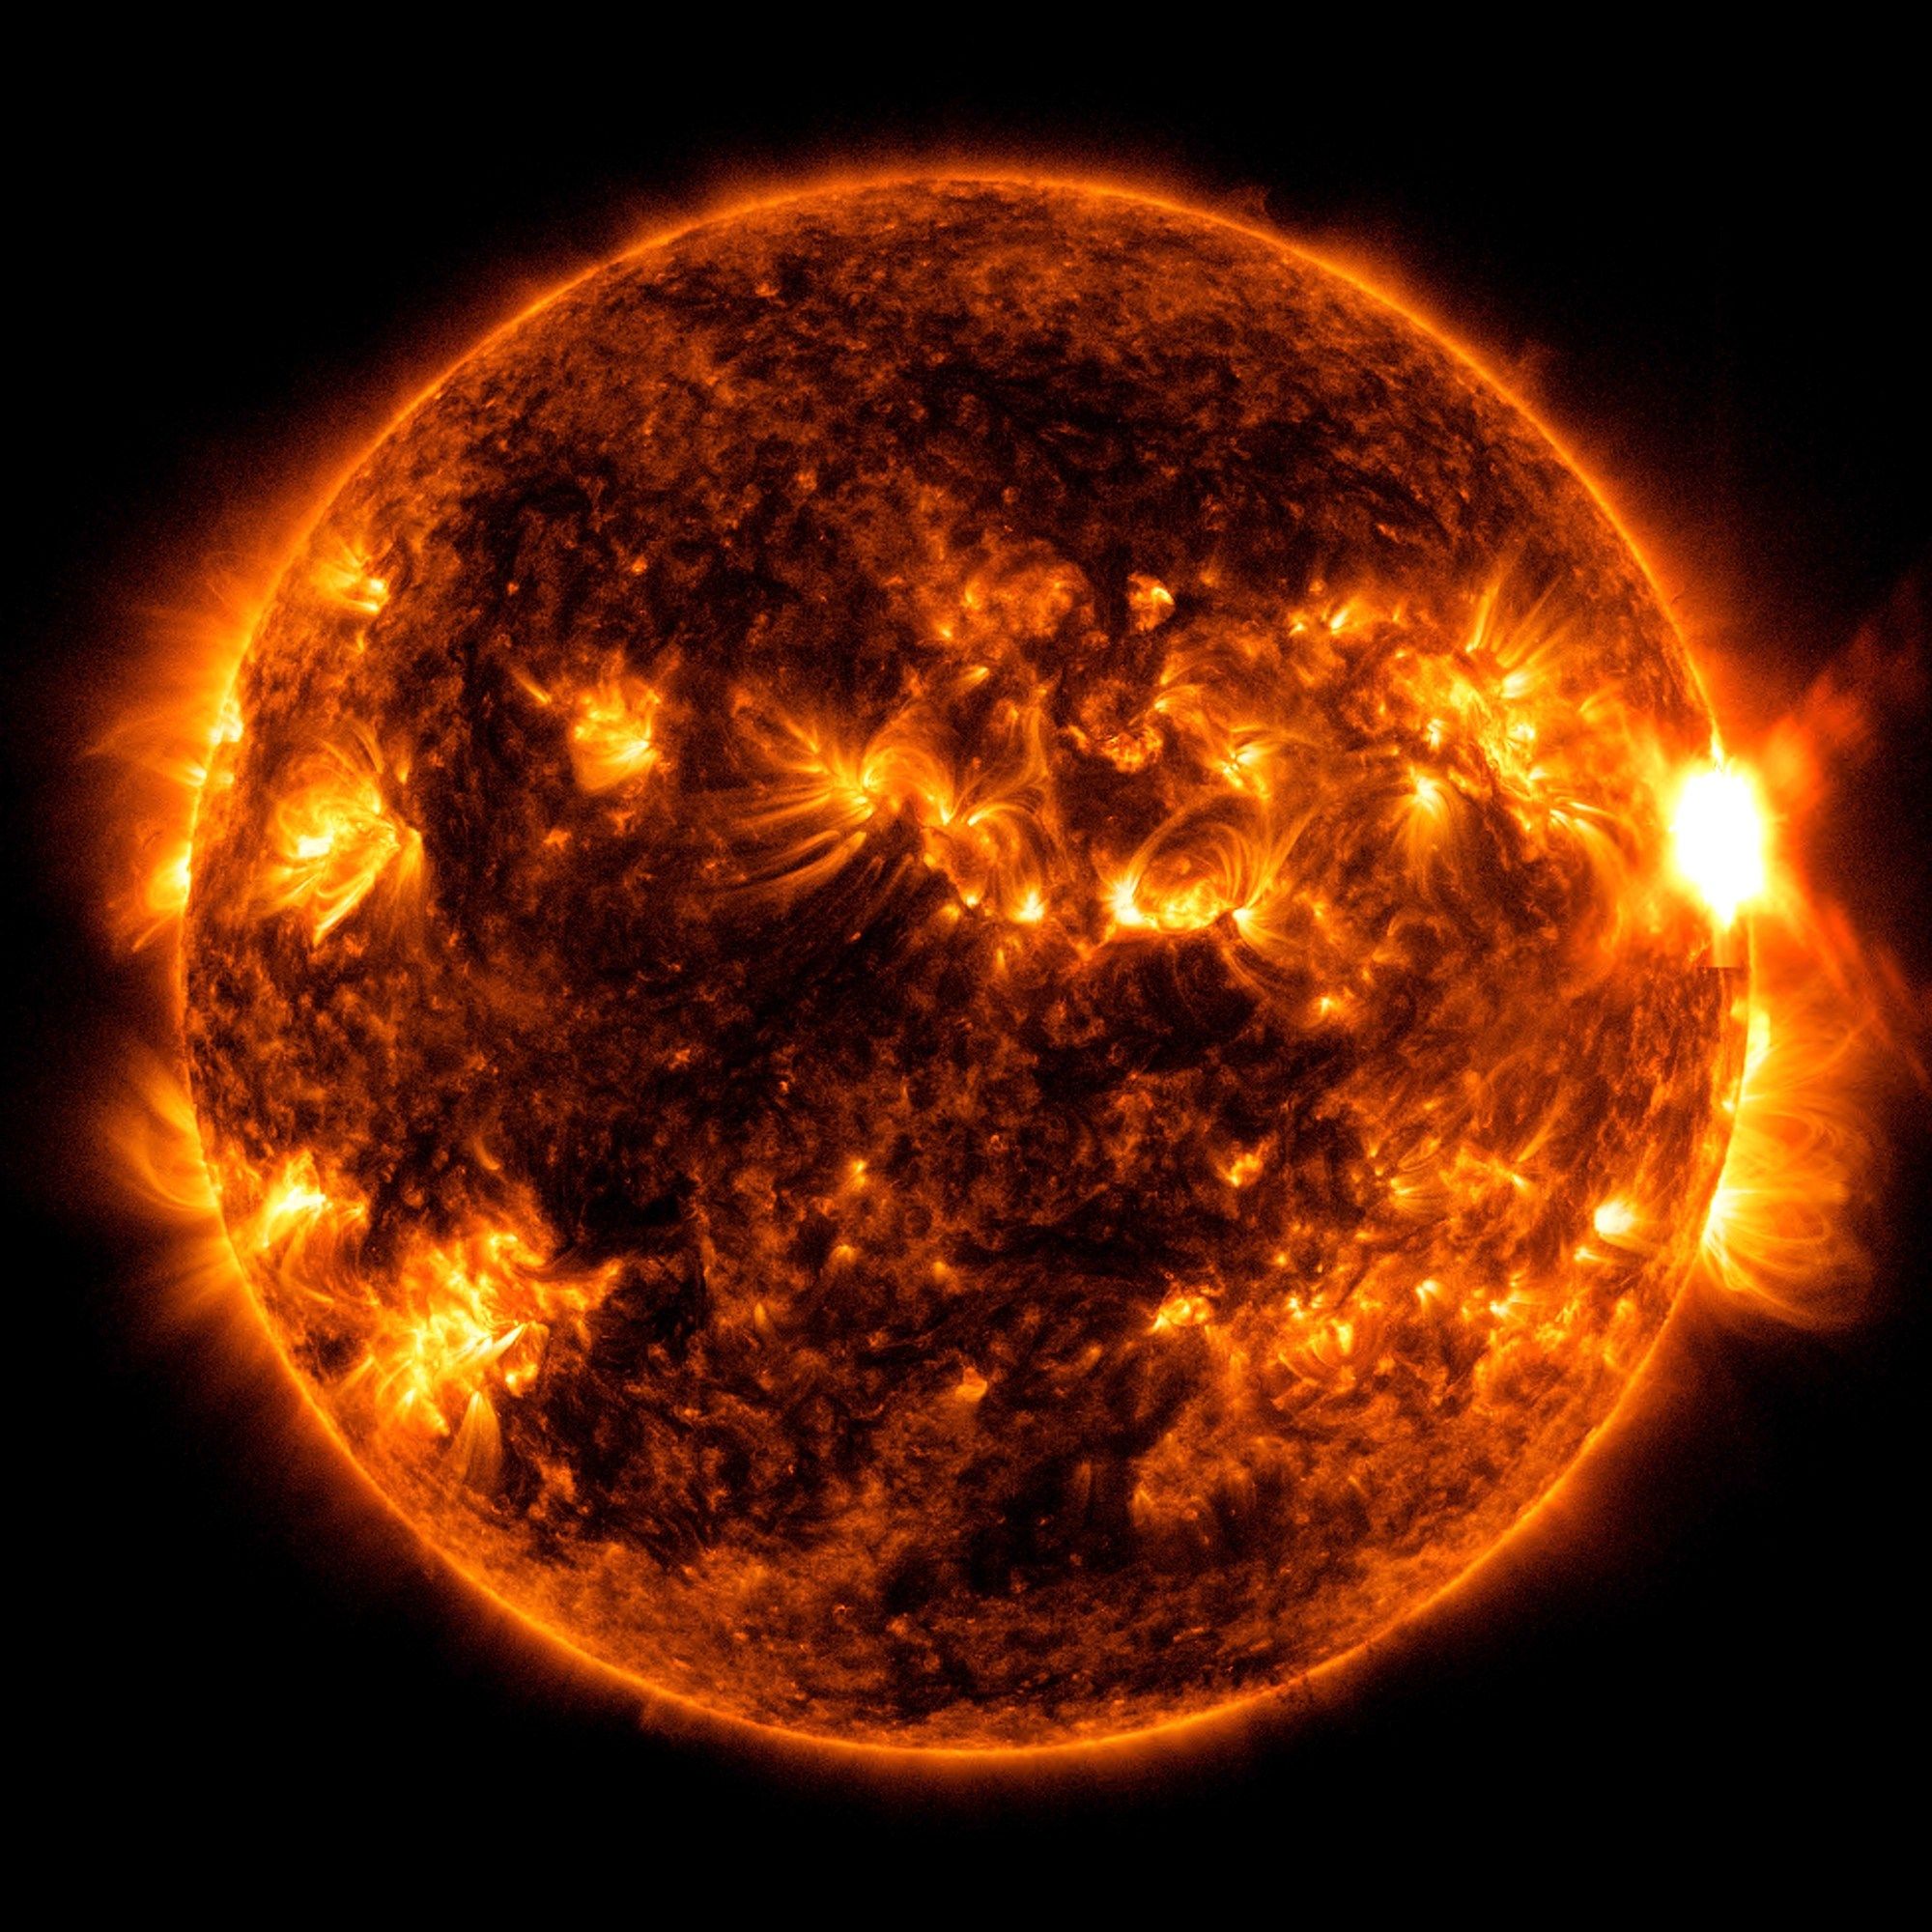 The Sun shown in red and orange, swirled with darker inactive areas and brighter active areas. On the right side of the Sun, there is a very bright region where the flare erupts.